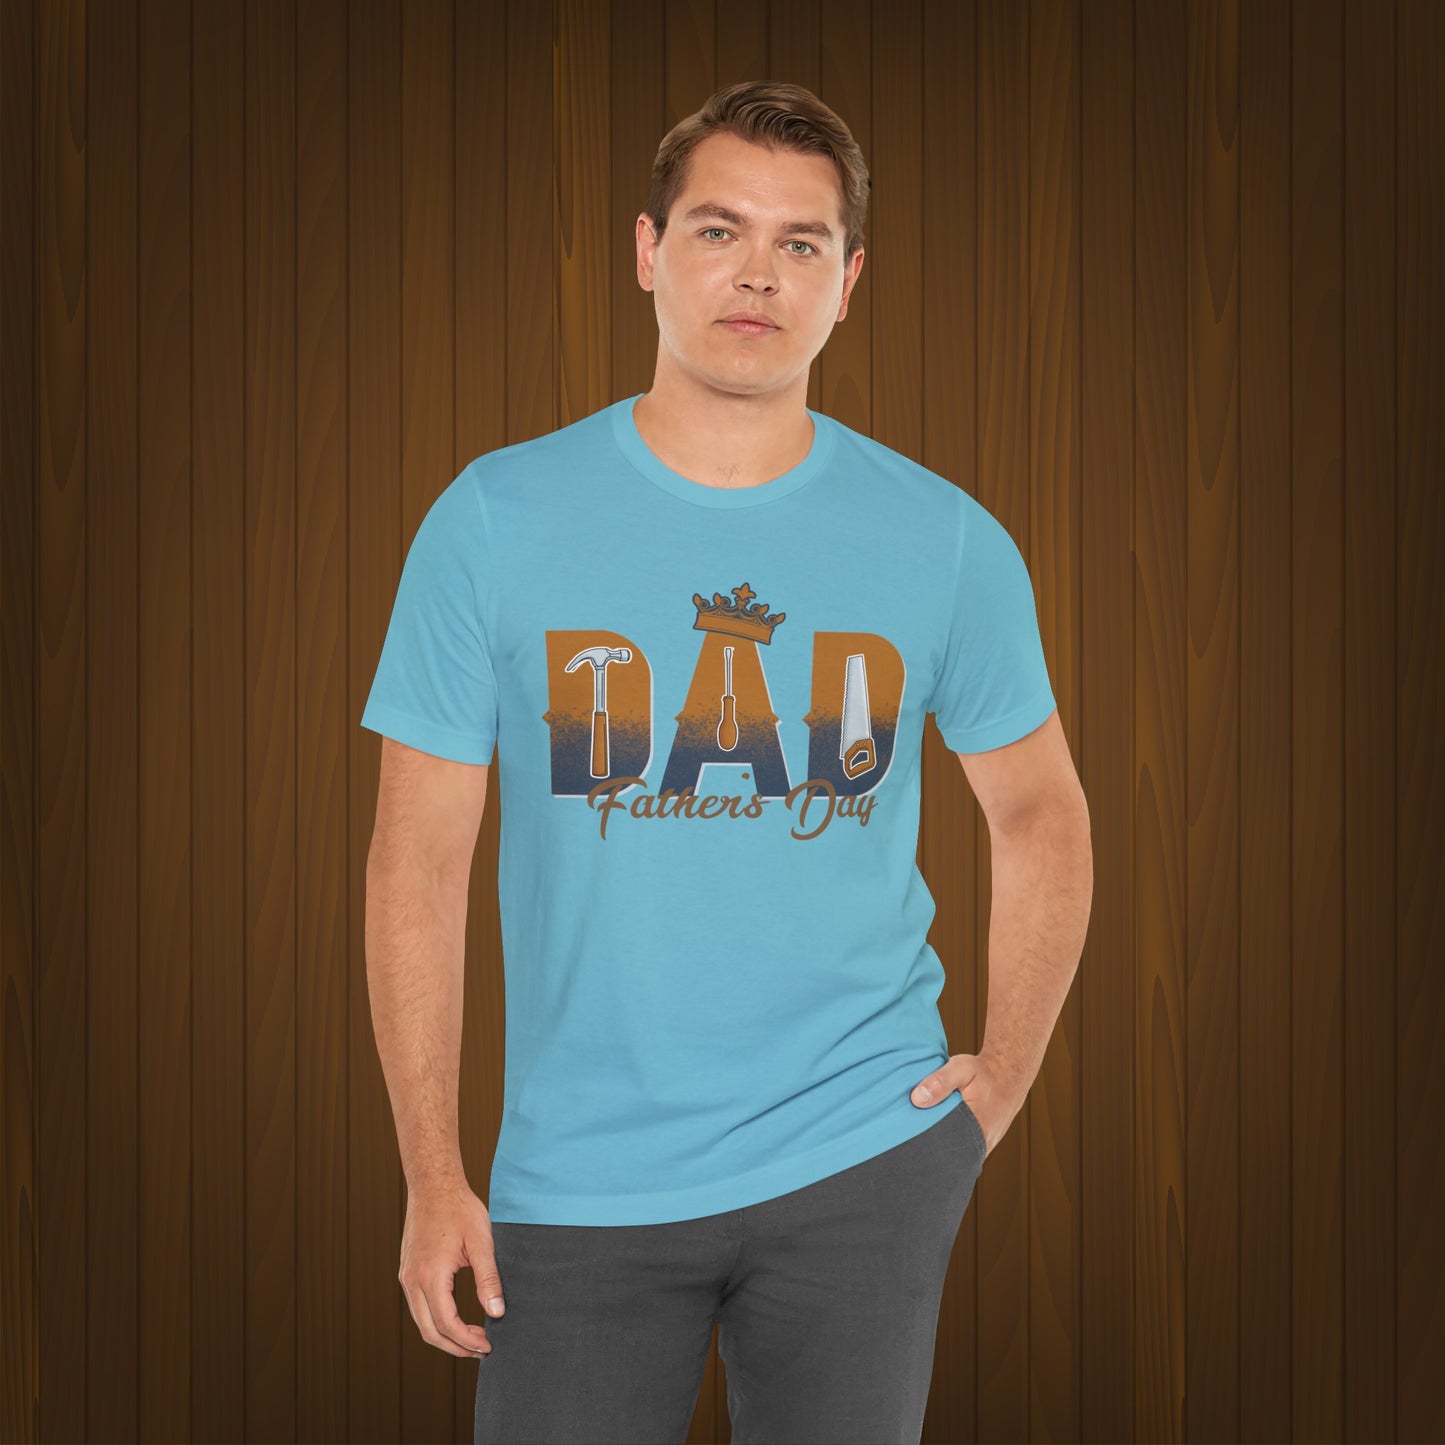 Happy Father's Day T-shirt For Dad, Dad Shirt, Gift for Dad.